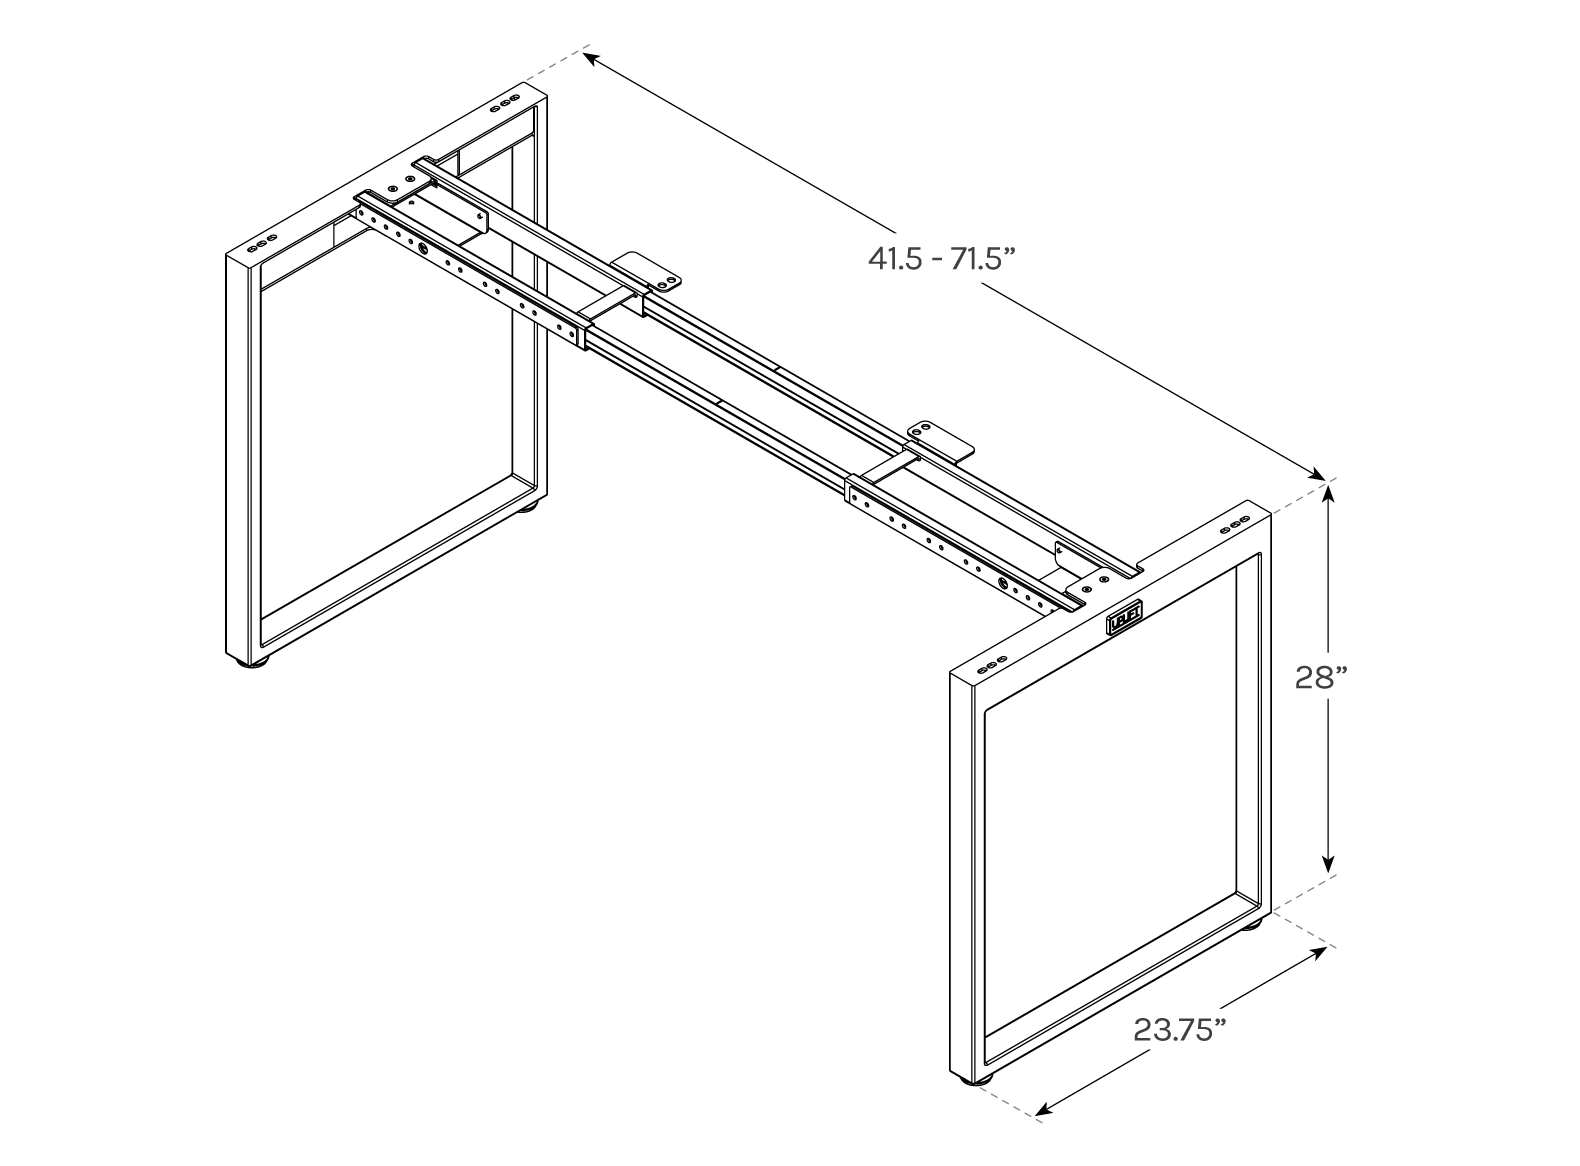 UPLIFT O-Leg Seated Height Table specs drawing